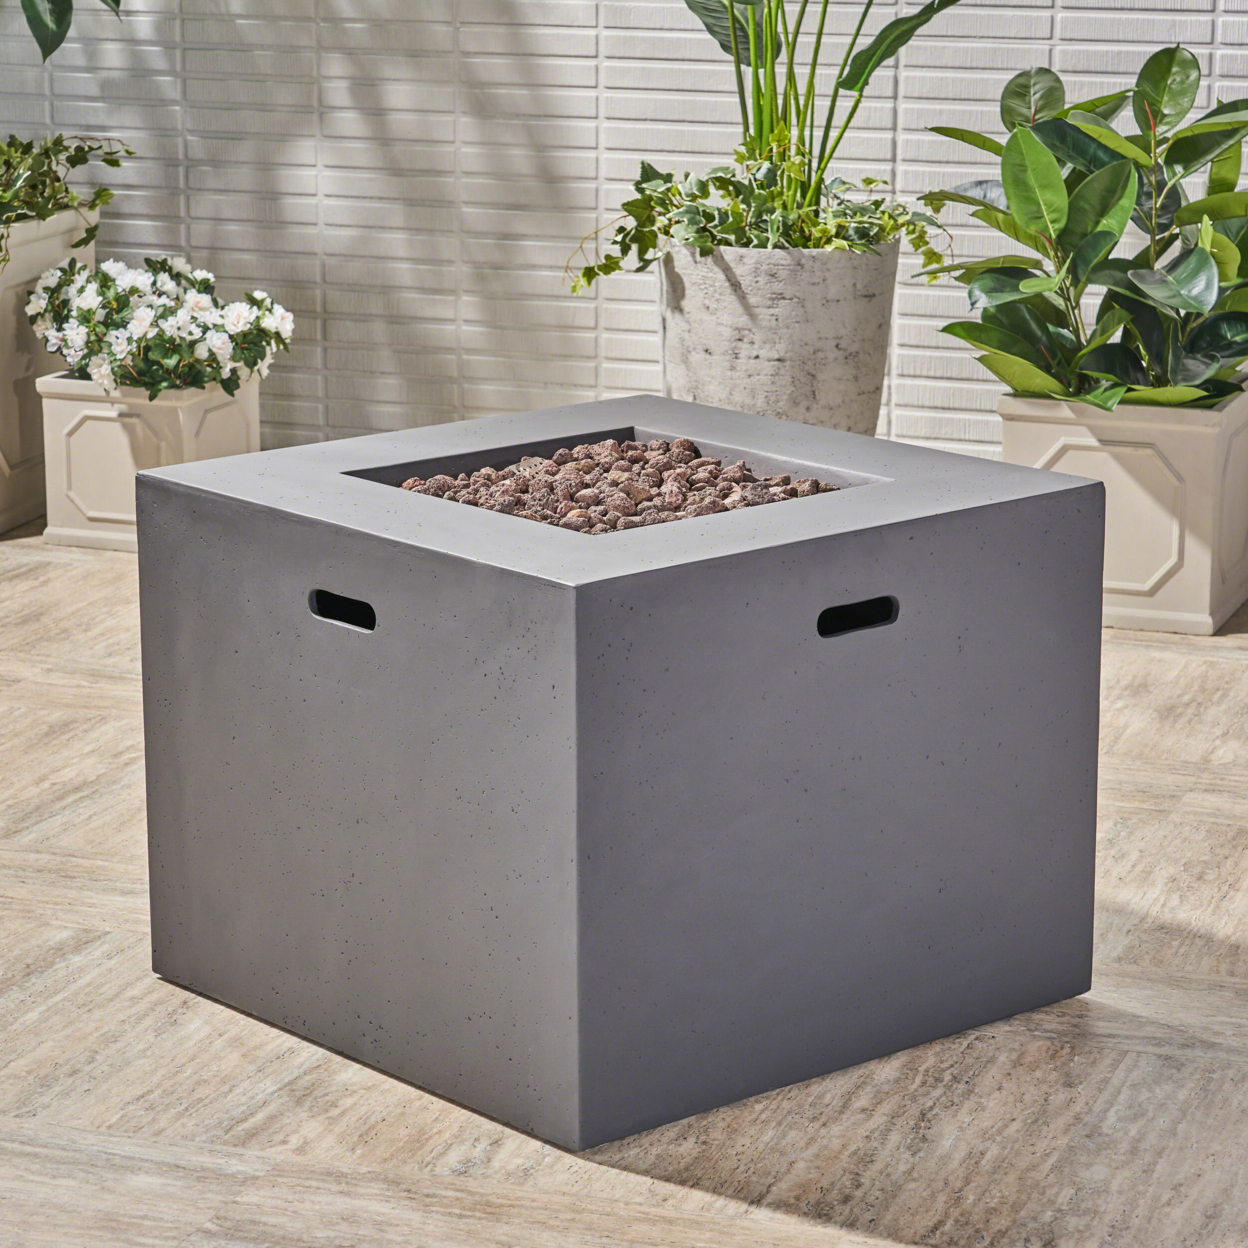 Leo Outdoor 31-inch Square Light Weight Concrete Gas Burning Fire Pit - Dark Gray